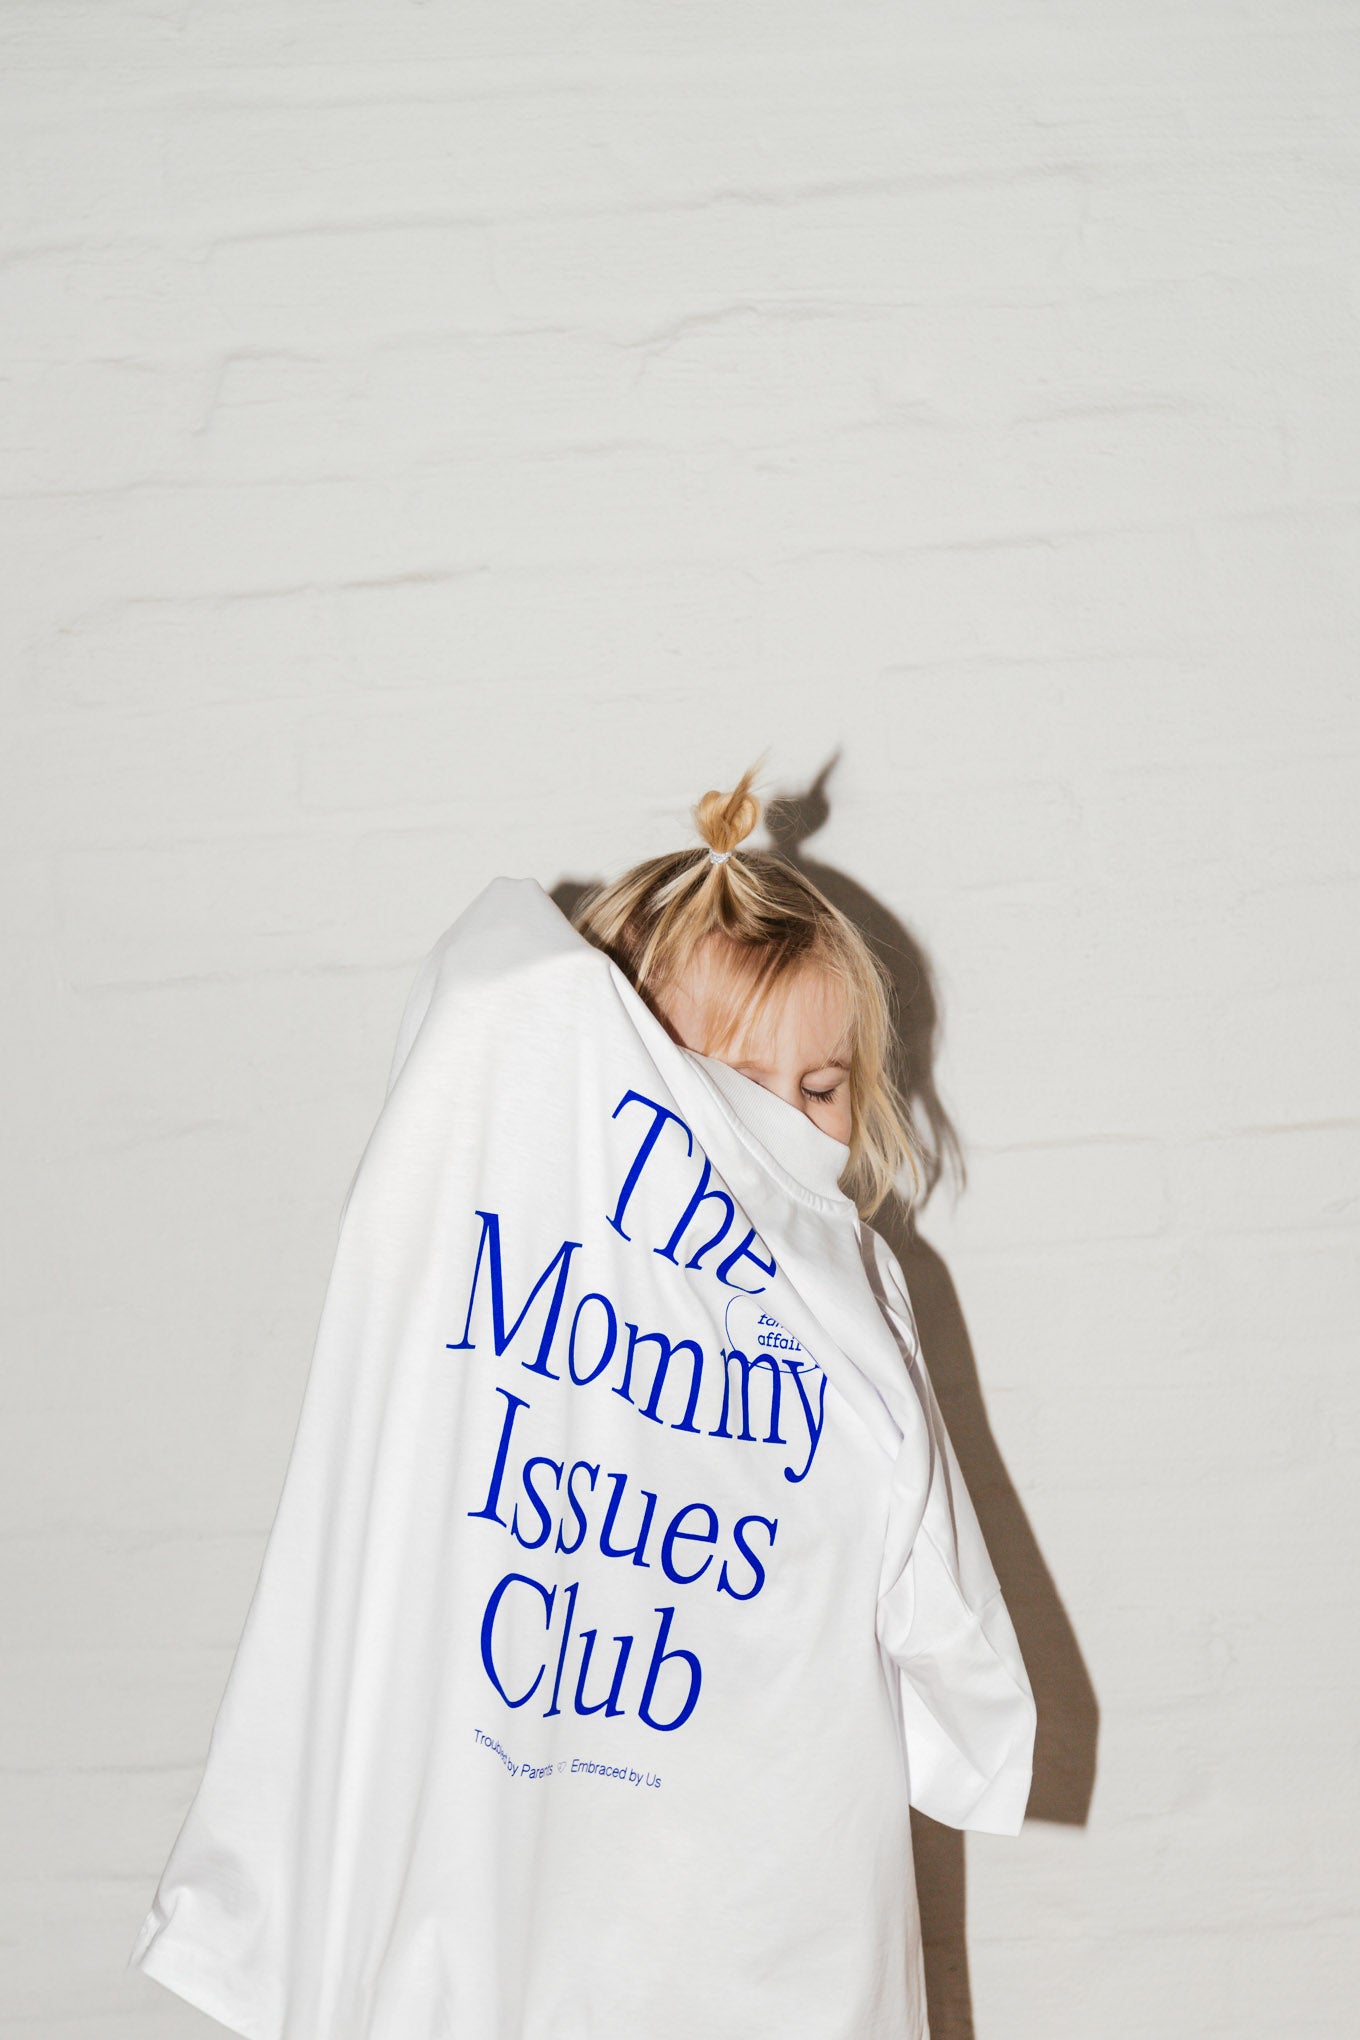 THE MOMMY ISSUES CLUB T-SHIRT